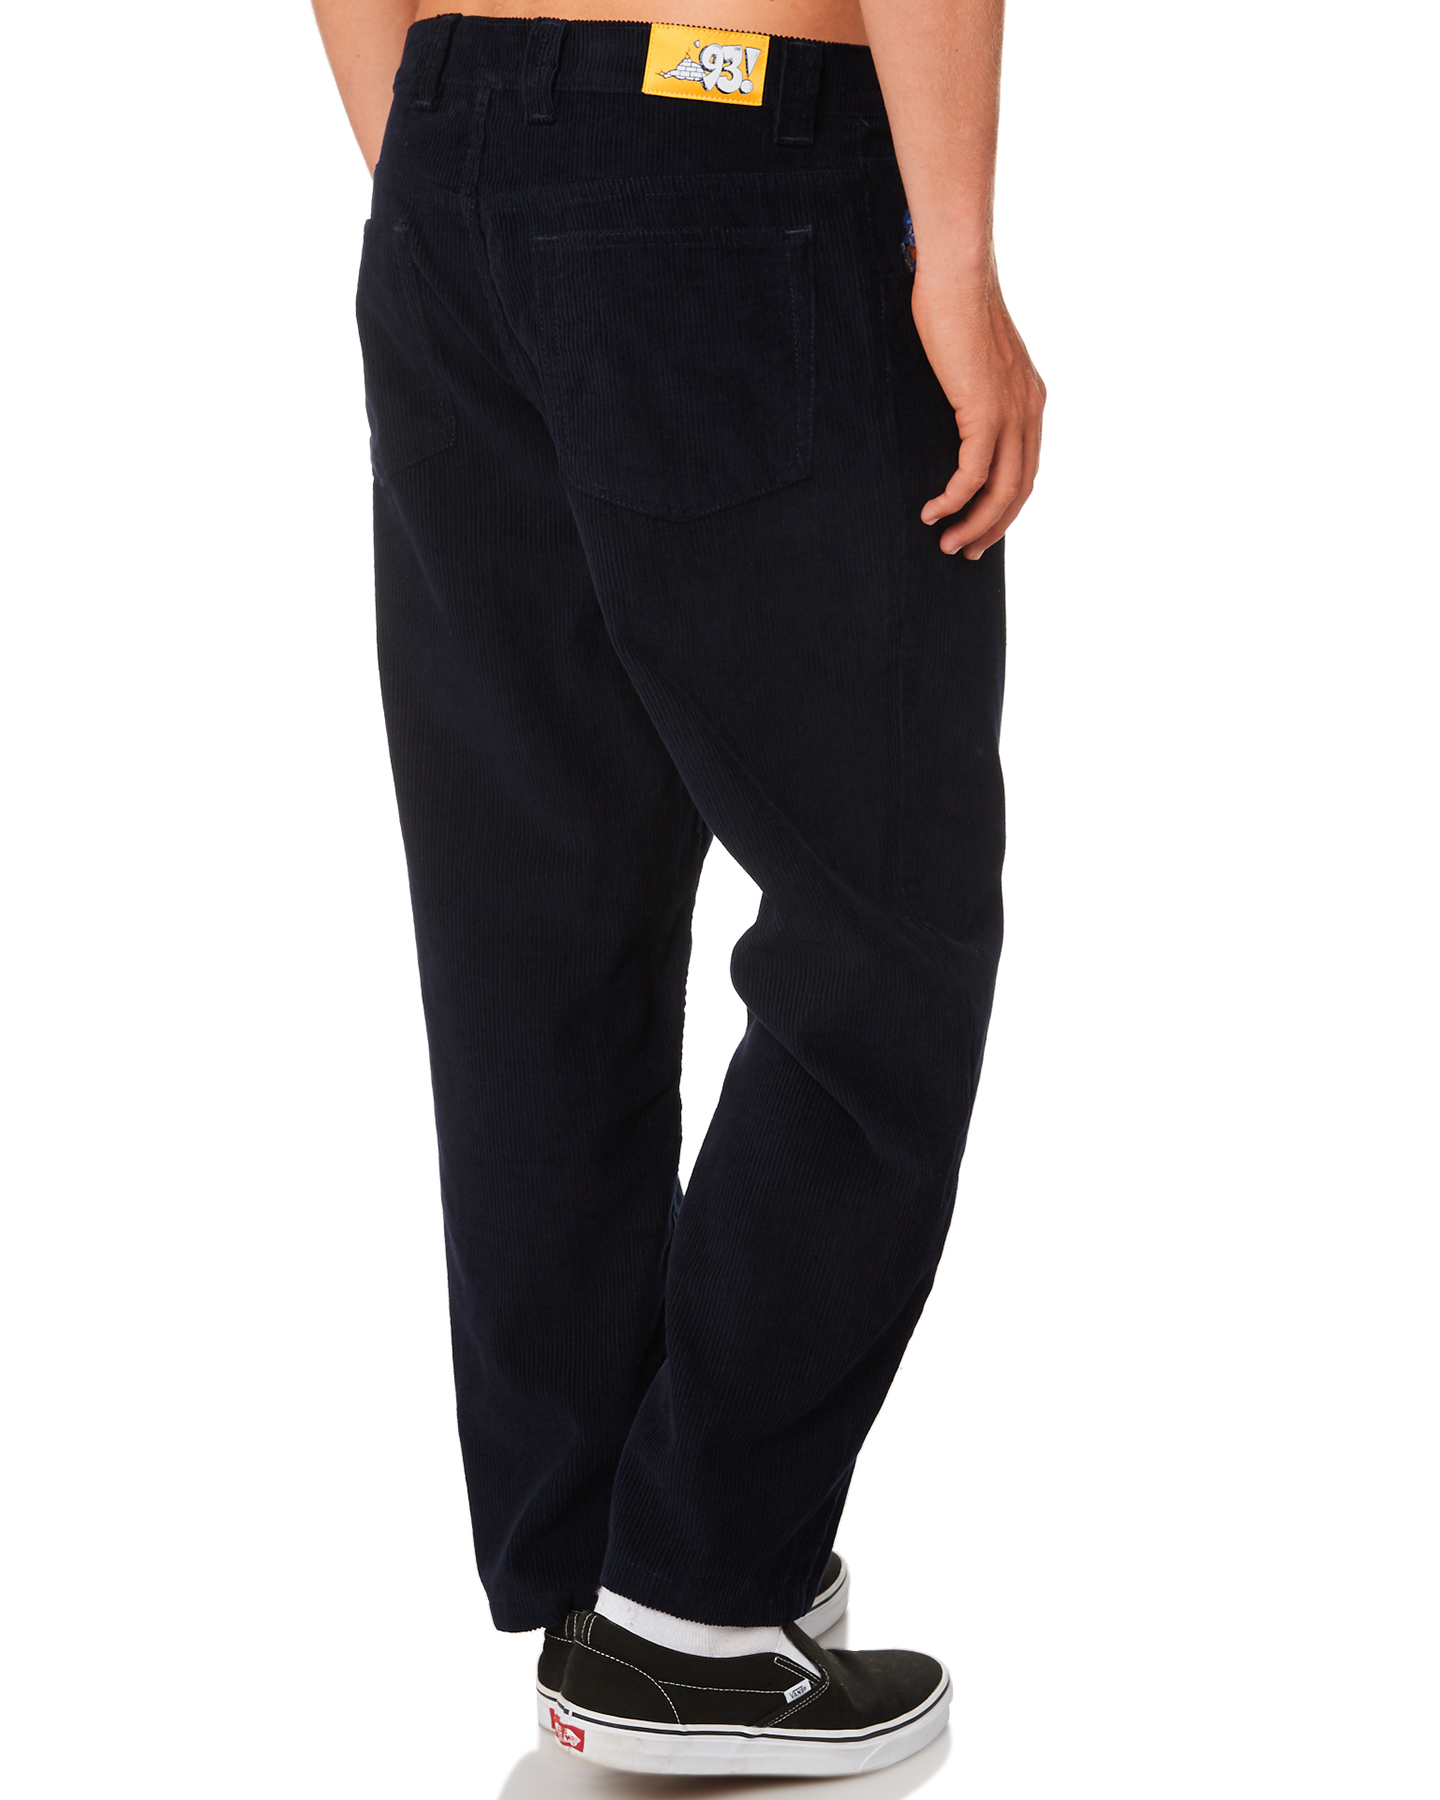 New Polar Skate Co. Men's 93 Mens Cords Pant Cotton Fitted Corduroy ...